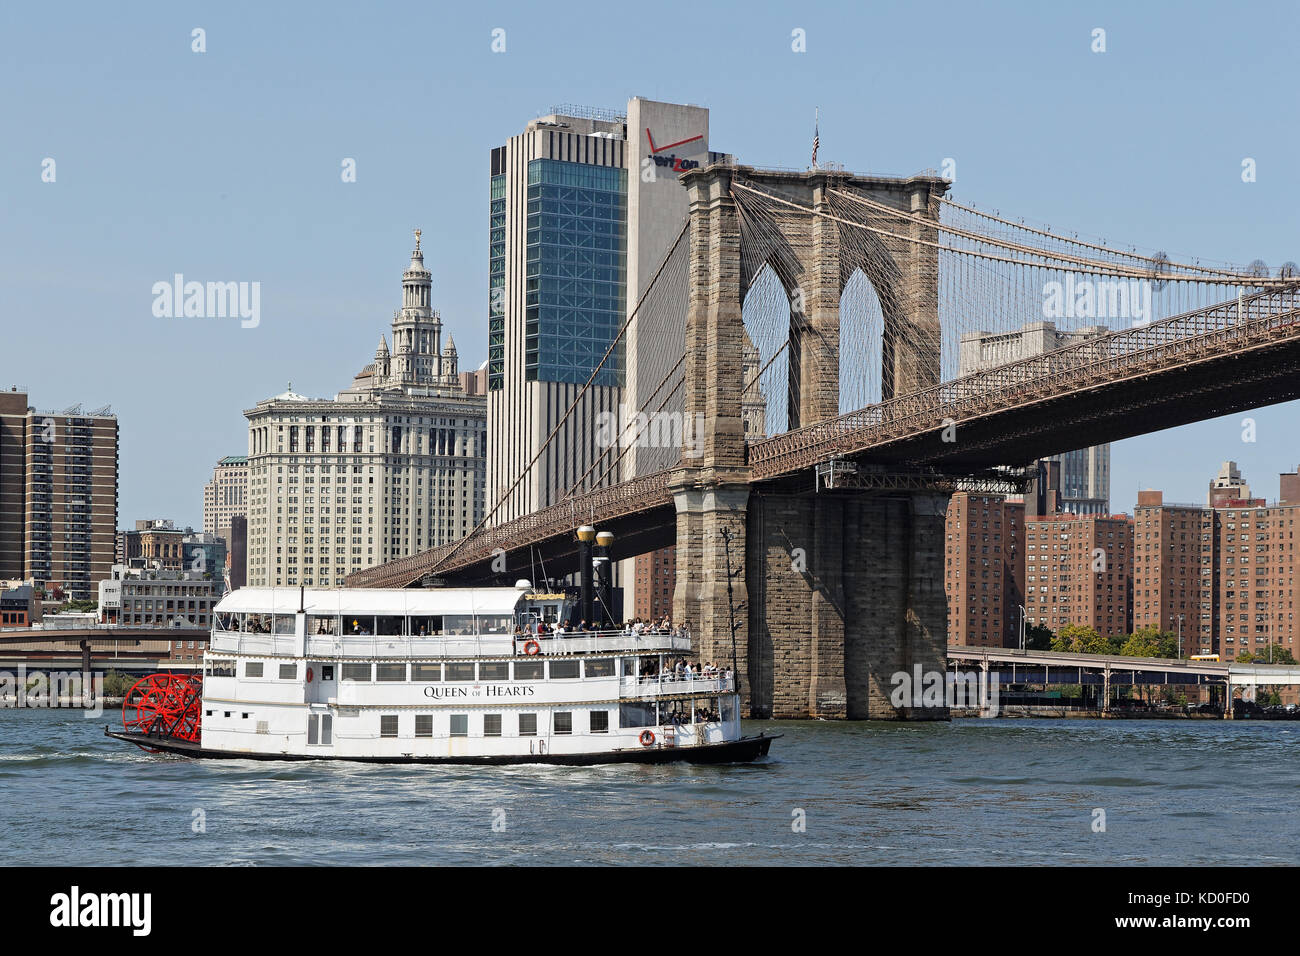 NEW YORK CITY, USA, September 11, 2017 : Paddle boat under Brooklyn Bridge. The Brooklyn Bridge is one of the oldest bridges in the US. It connects th Stock Photo